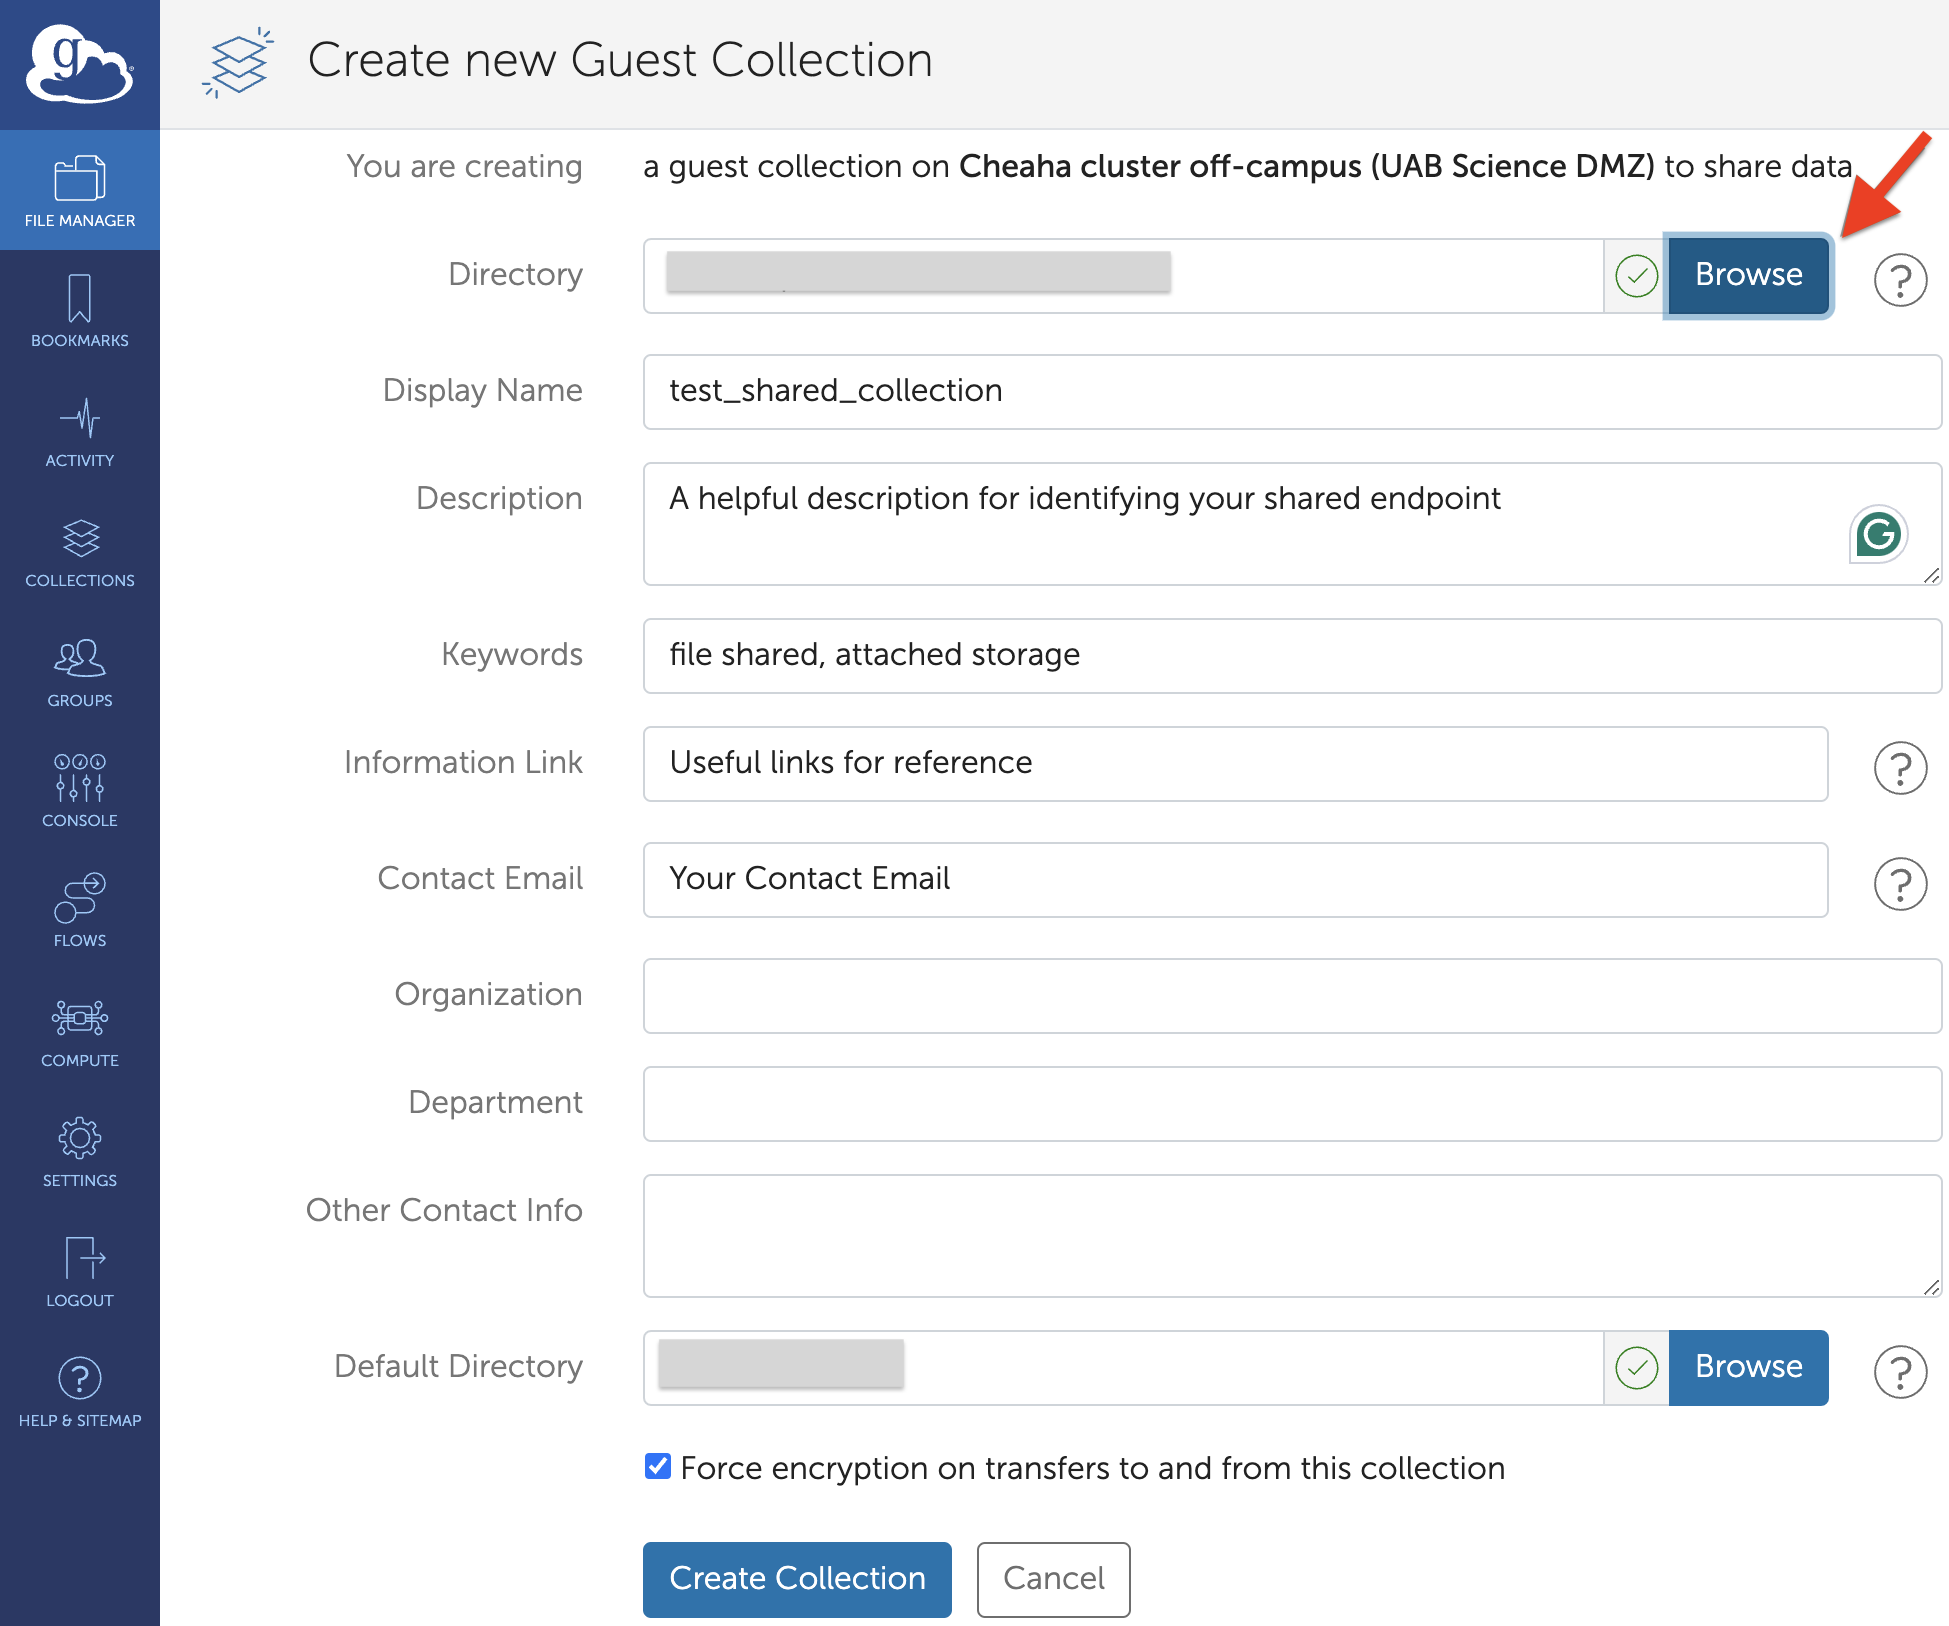 Create New Guest Collection form.